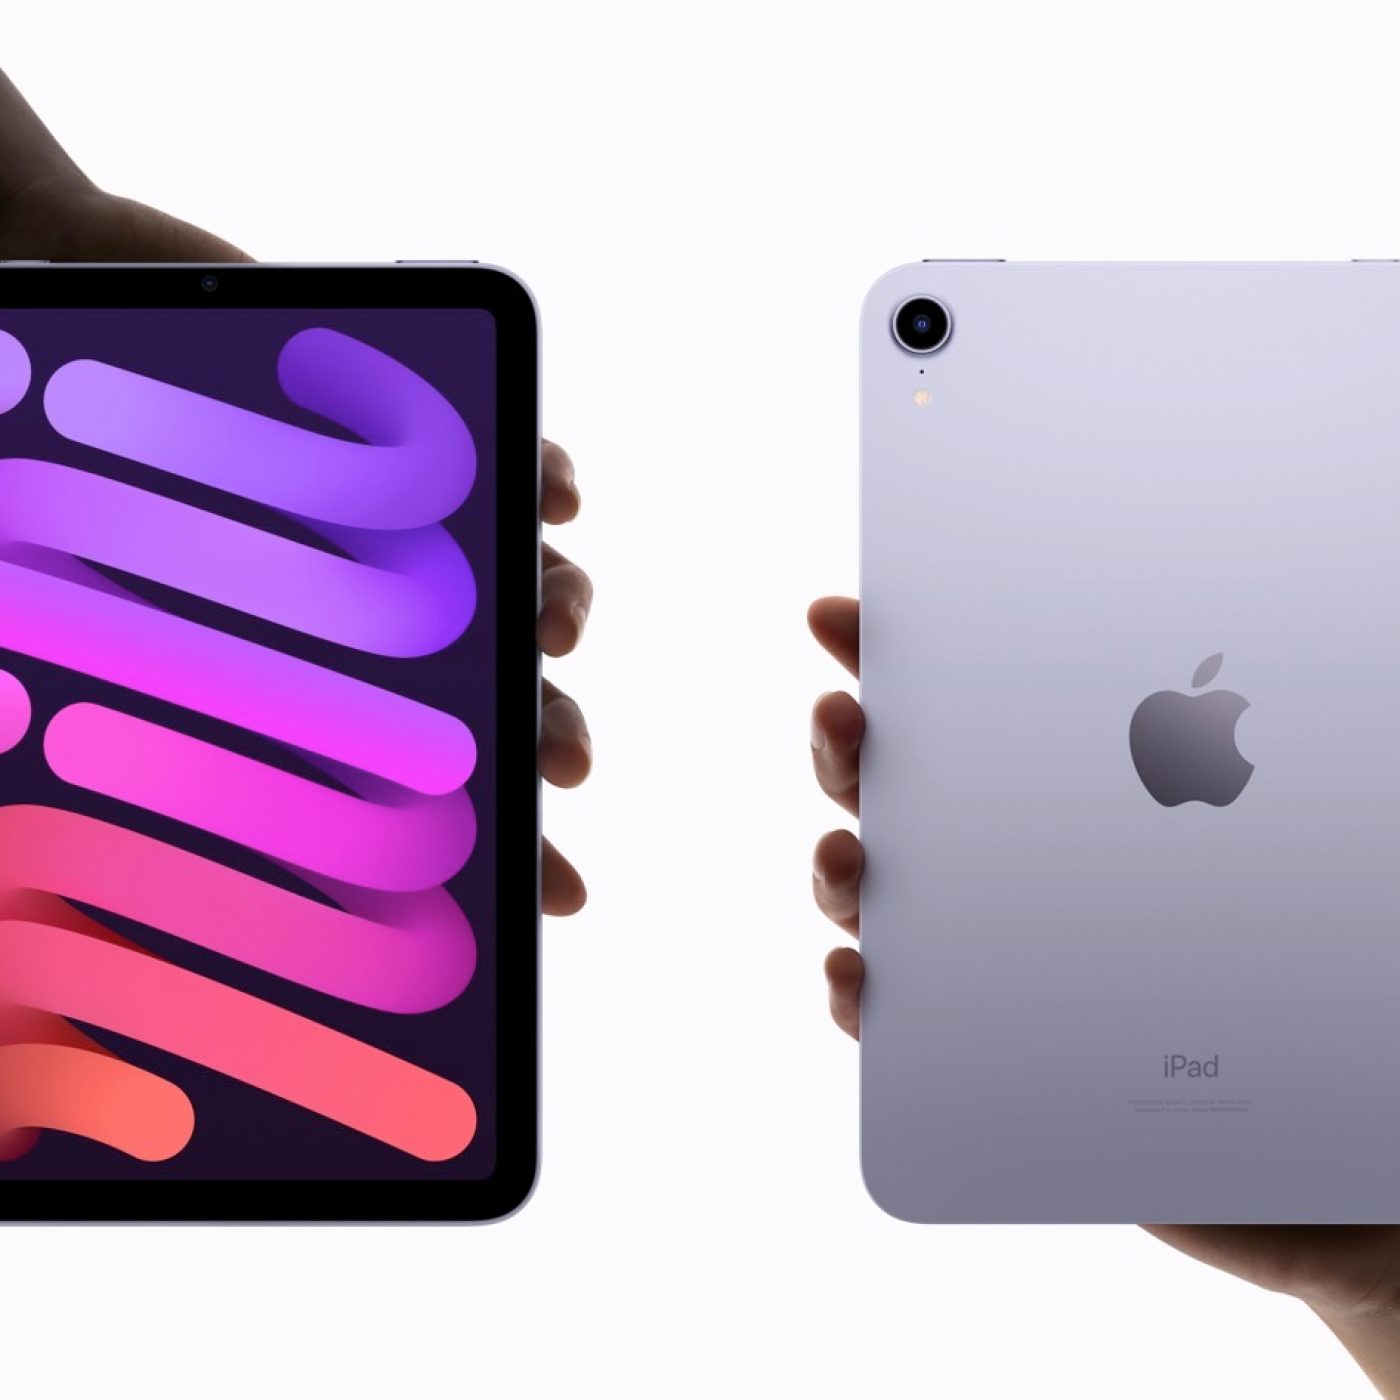 iPad mini 6 is practically an iPhone 13 Pro begging to be folded